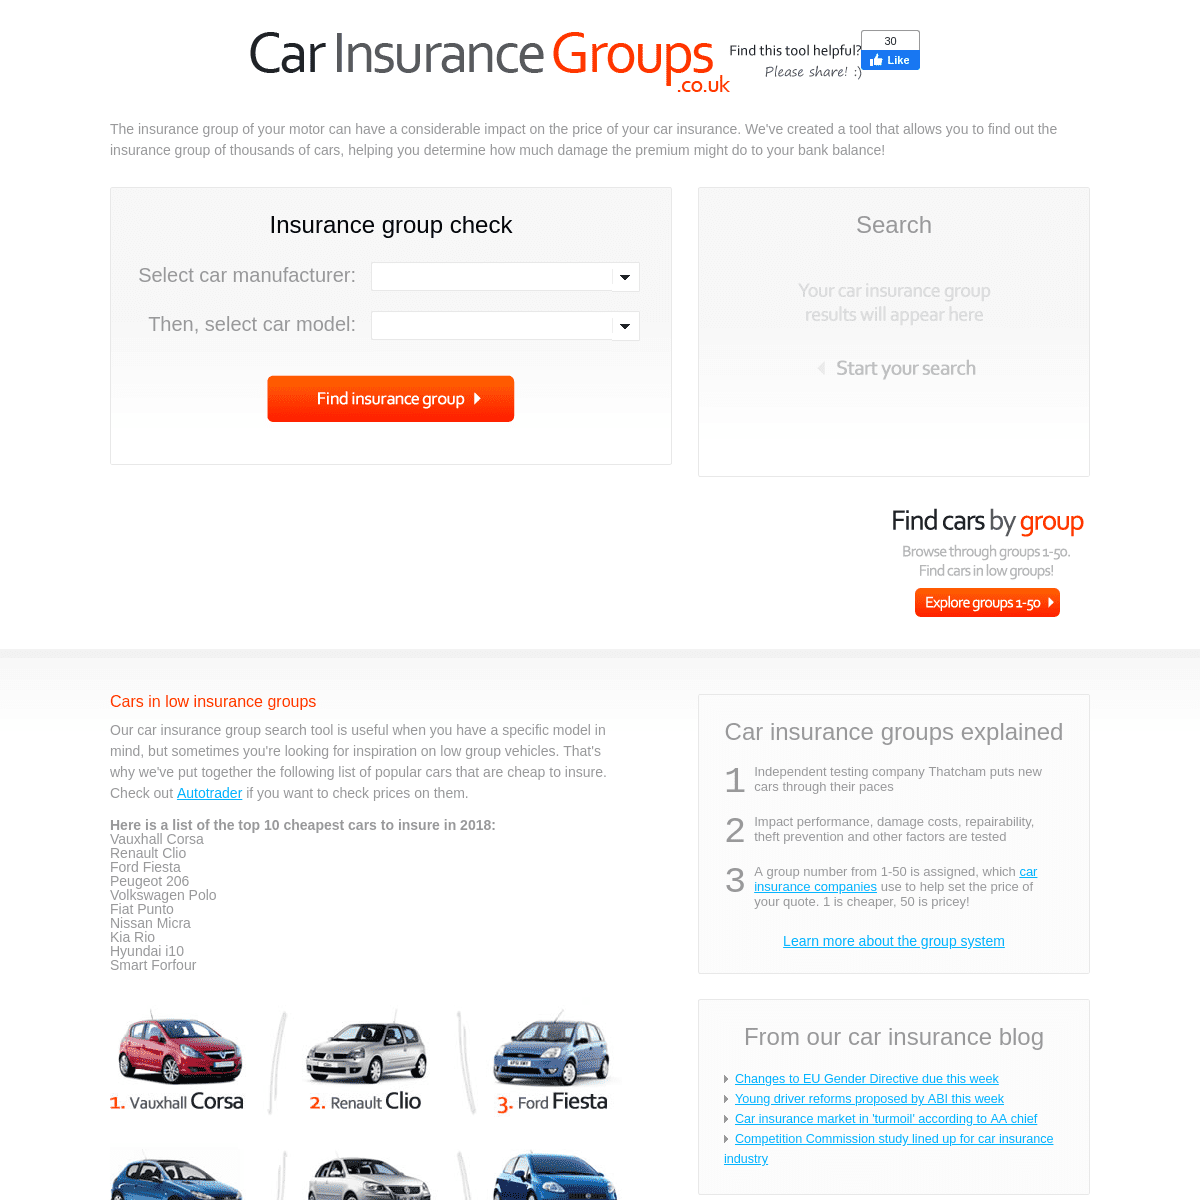 A complete backup of carinsurancegroups.co.uk